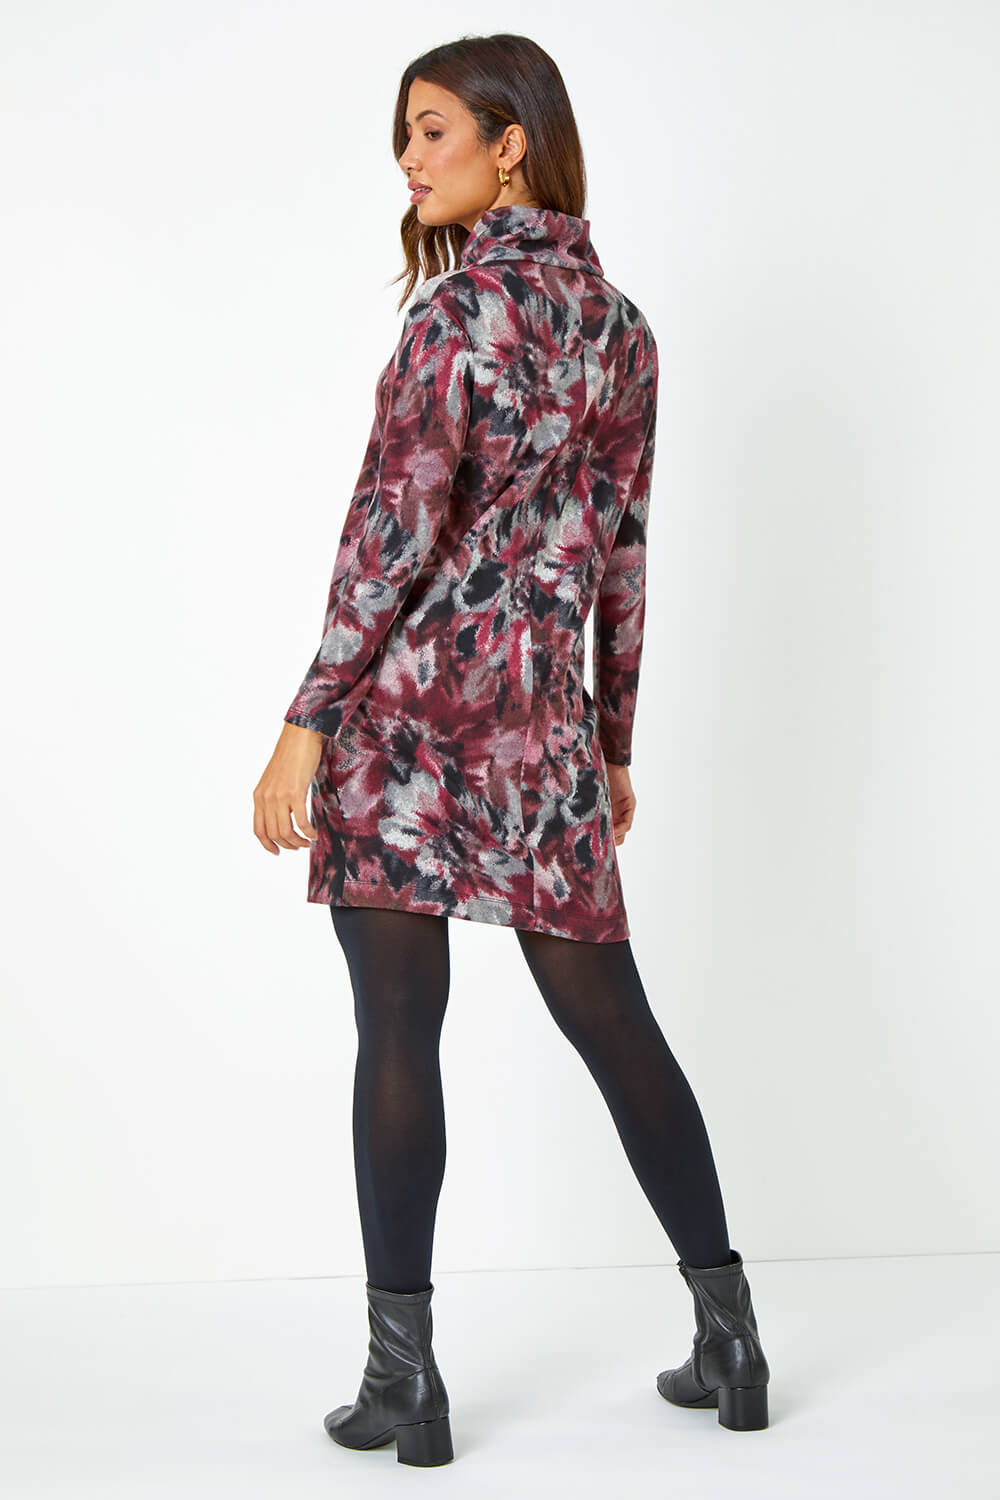 Red Floral Tie Dye Print Tunic Stretch Dress, Image 3 of 5